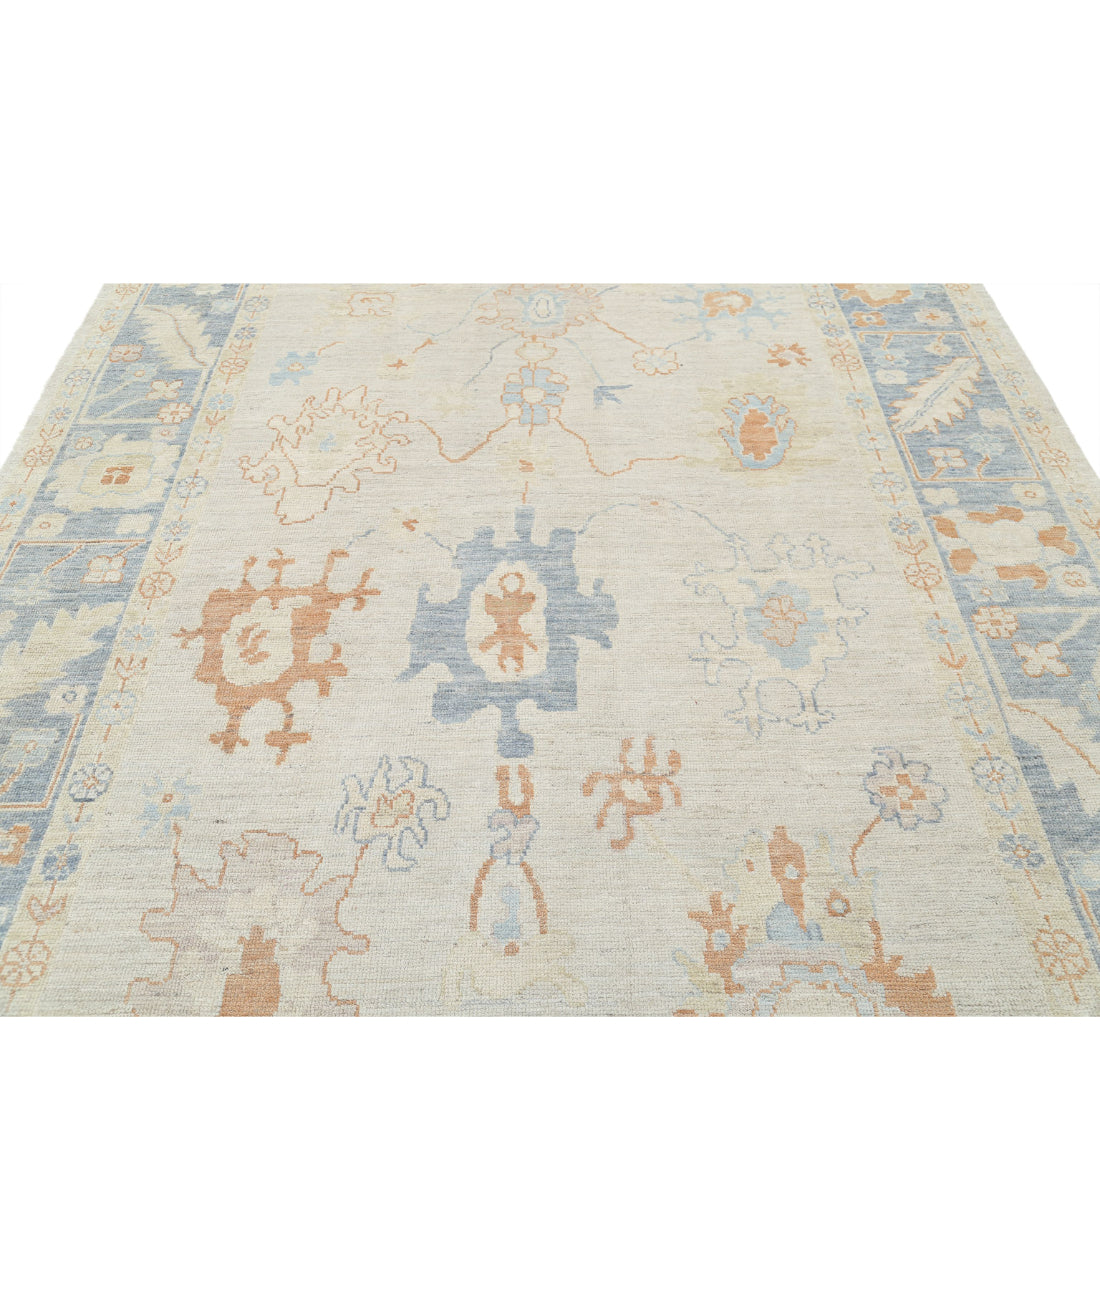 Hand Knotted Oushak Wool Rug - 7'10'' x 10'0'' 7'10'' x 10'0'' (235 X 300) / Ivory / Grey